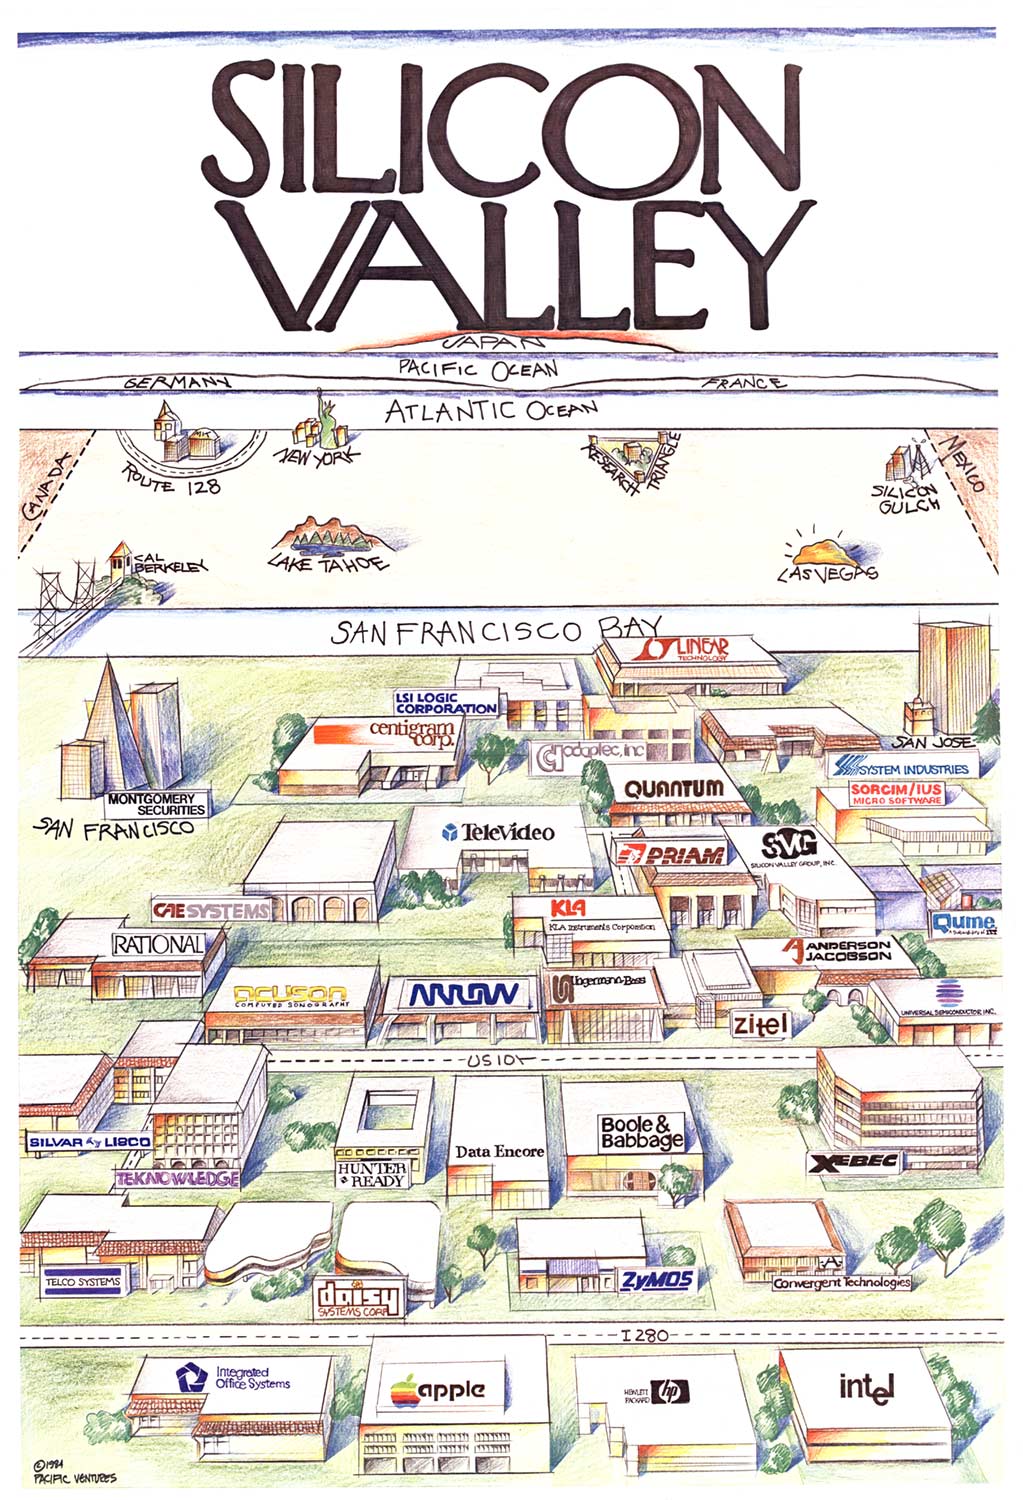 Original "Silicon Valley" vintage poster. Fun Map. <br>Archival linen backed. Printed: 1984. Printed Pacific Ventures. <br> <br>This is a rare, original Silicon Valley poster, printed by Pacific Ventures in 1984. The poster features a fun map of Si